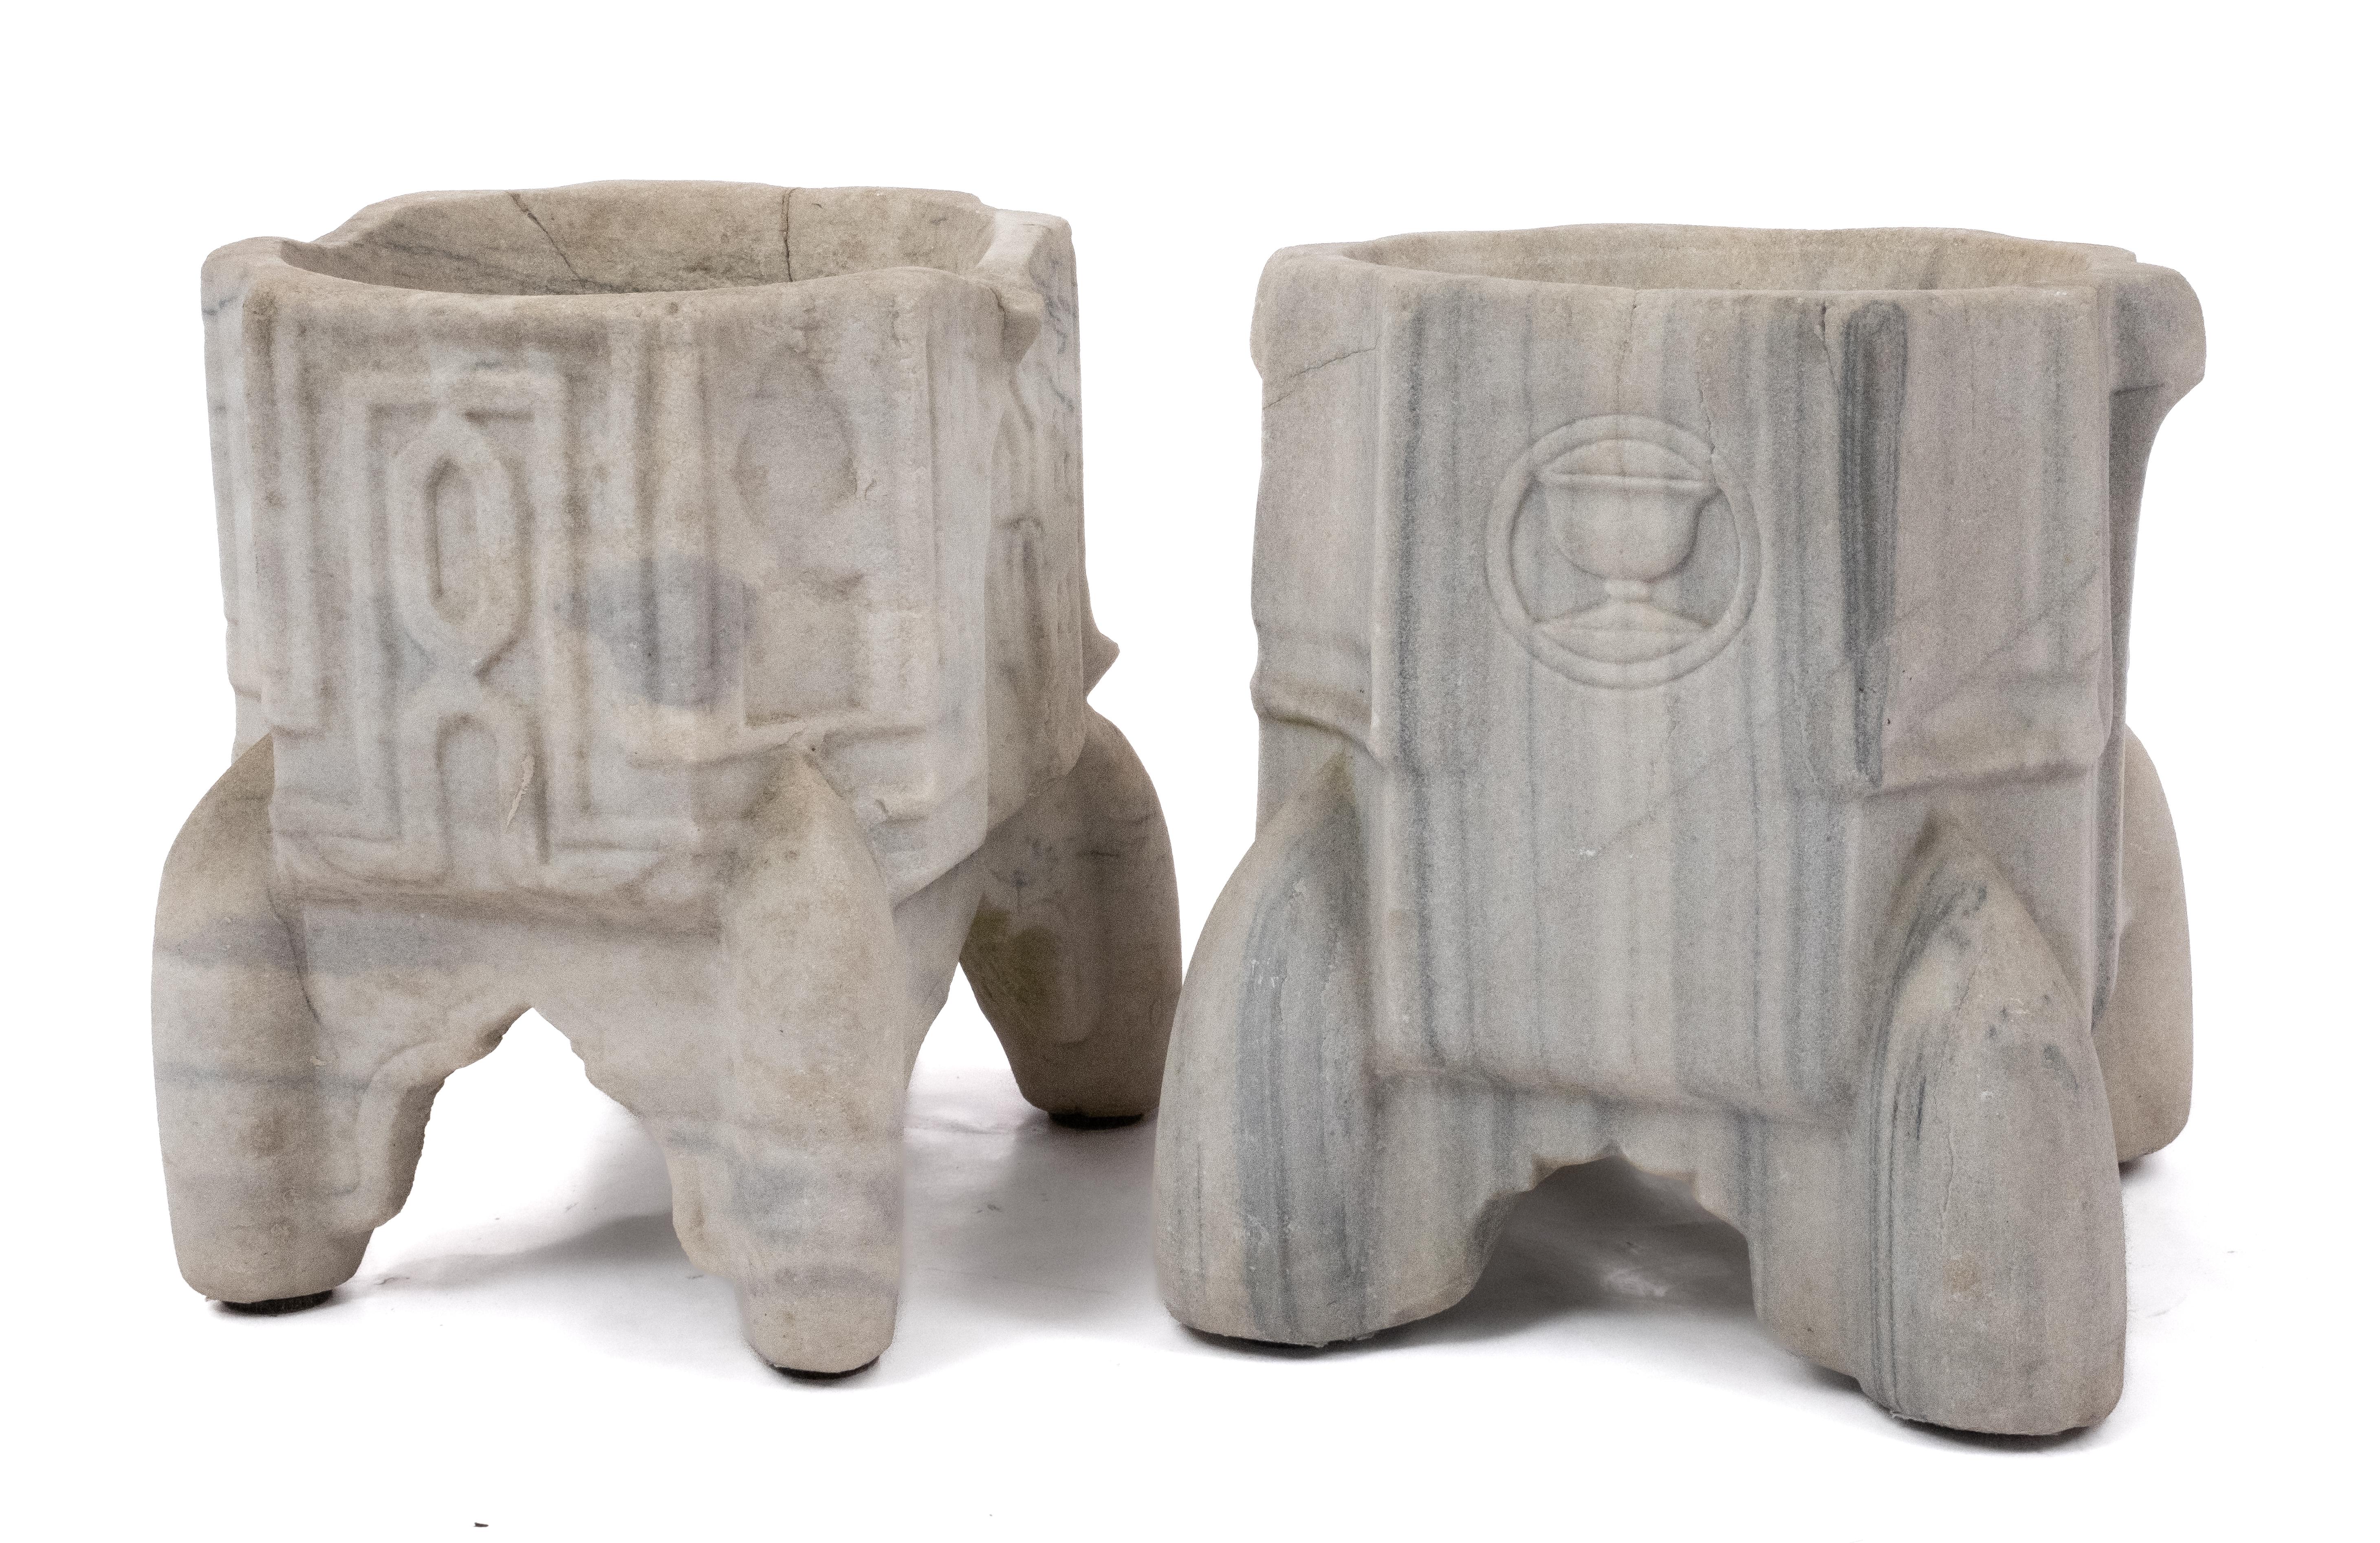 Two Fatimid marble jar stands (kilgas) - Image 3 of 4